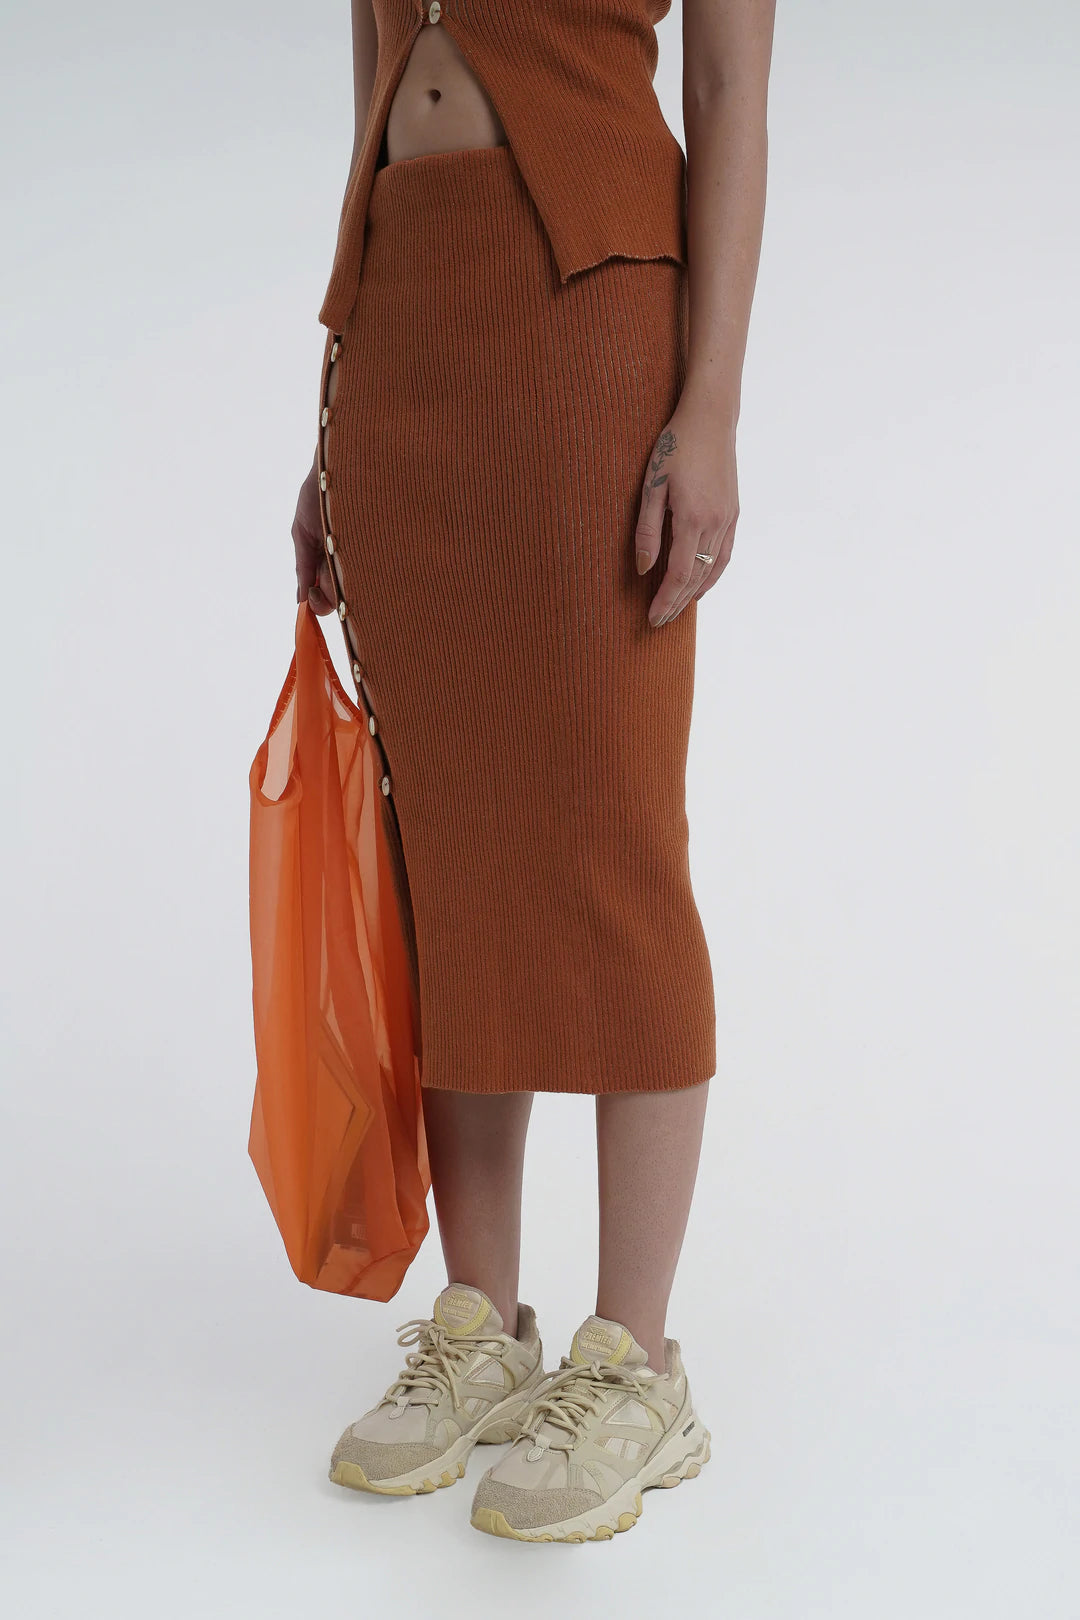 Kick up skirt in tobacco with button side detail.